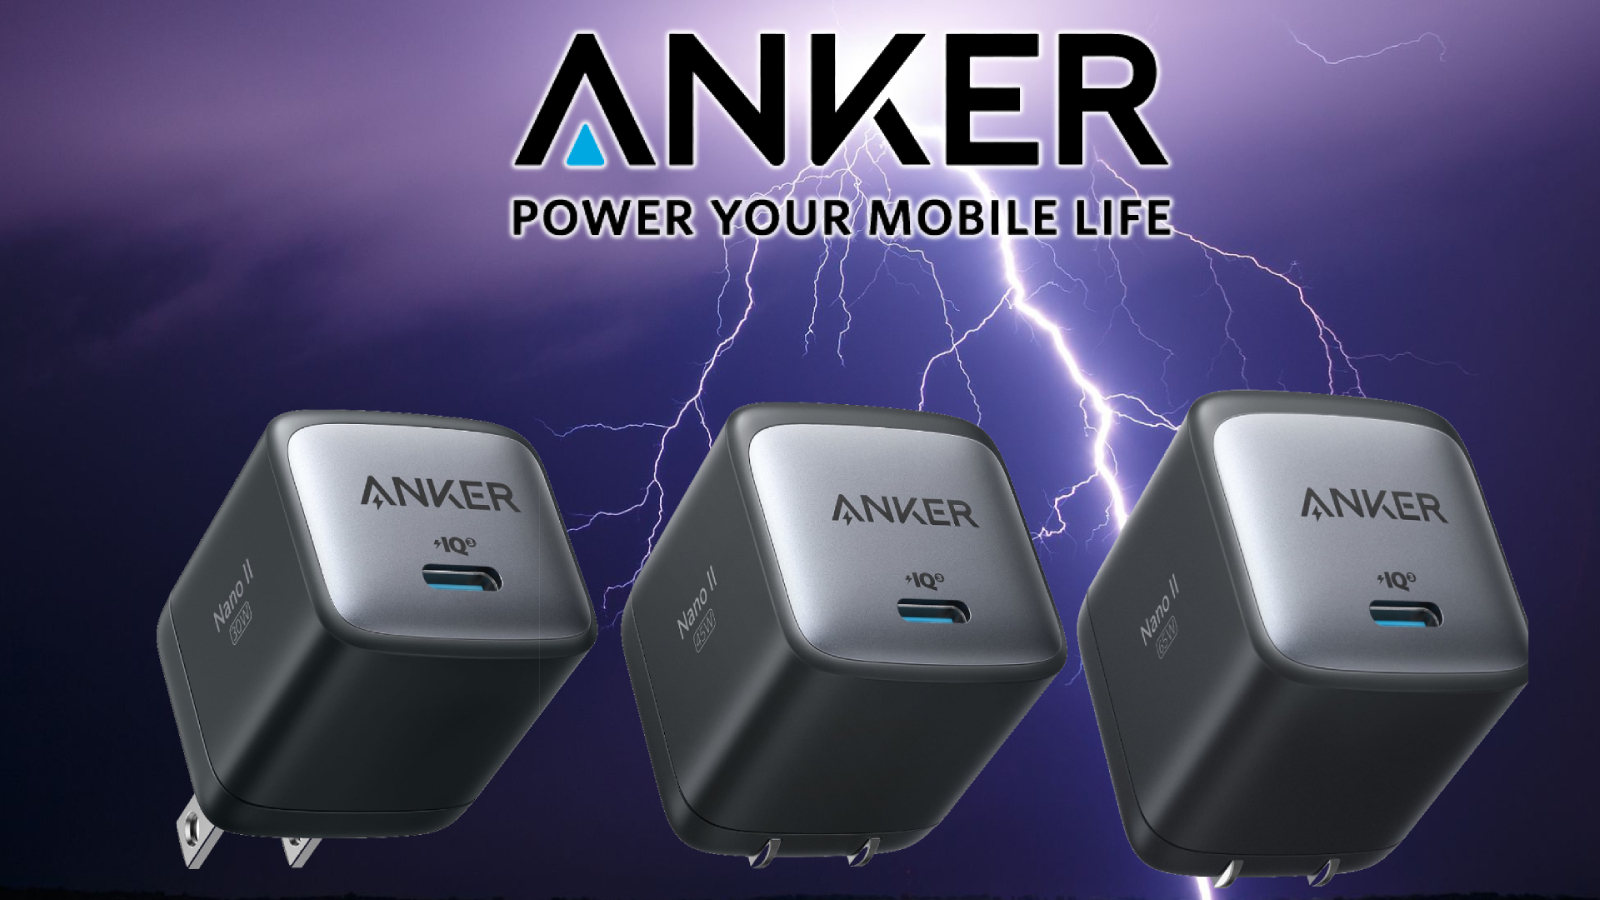 Fast charger fans get a powerful new option with Anker's USB-C